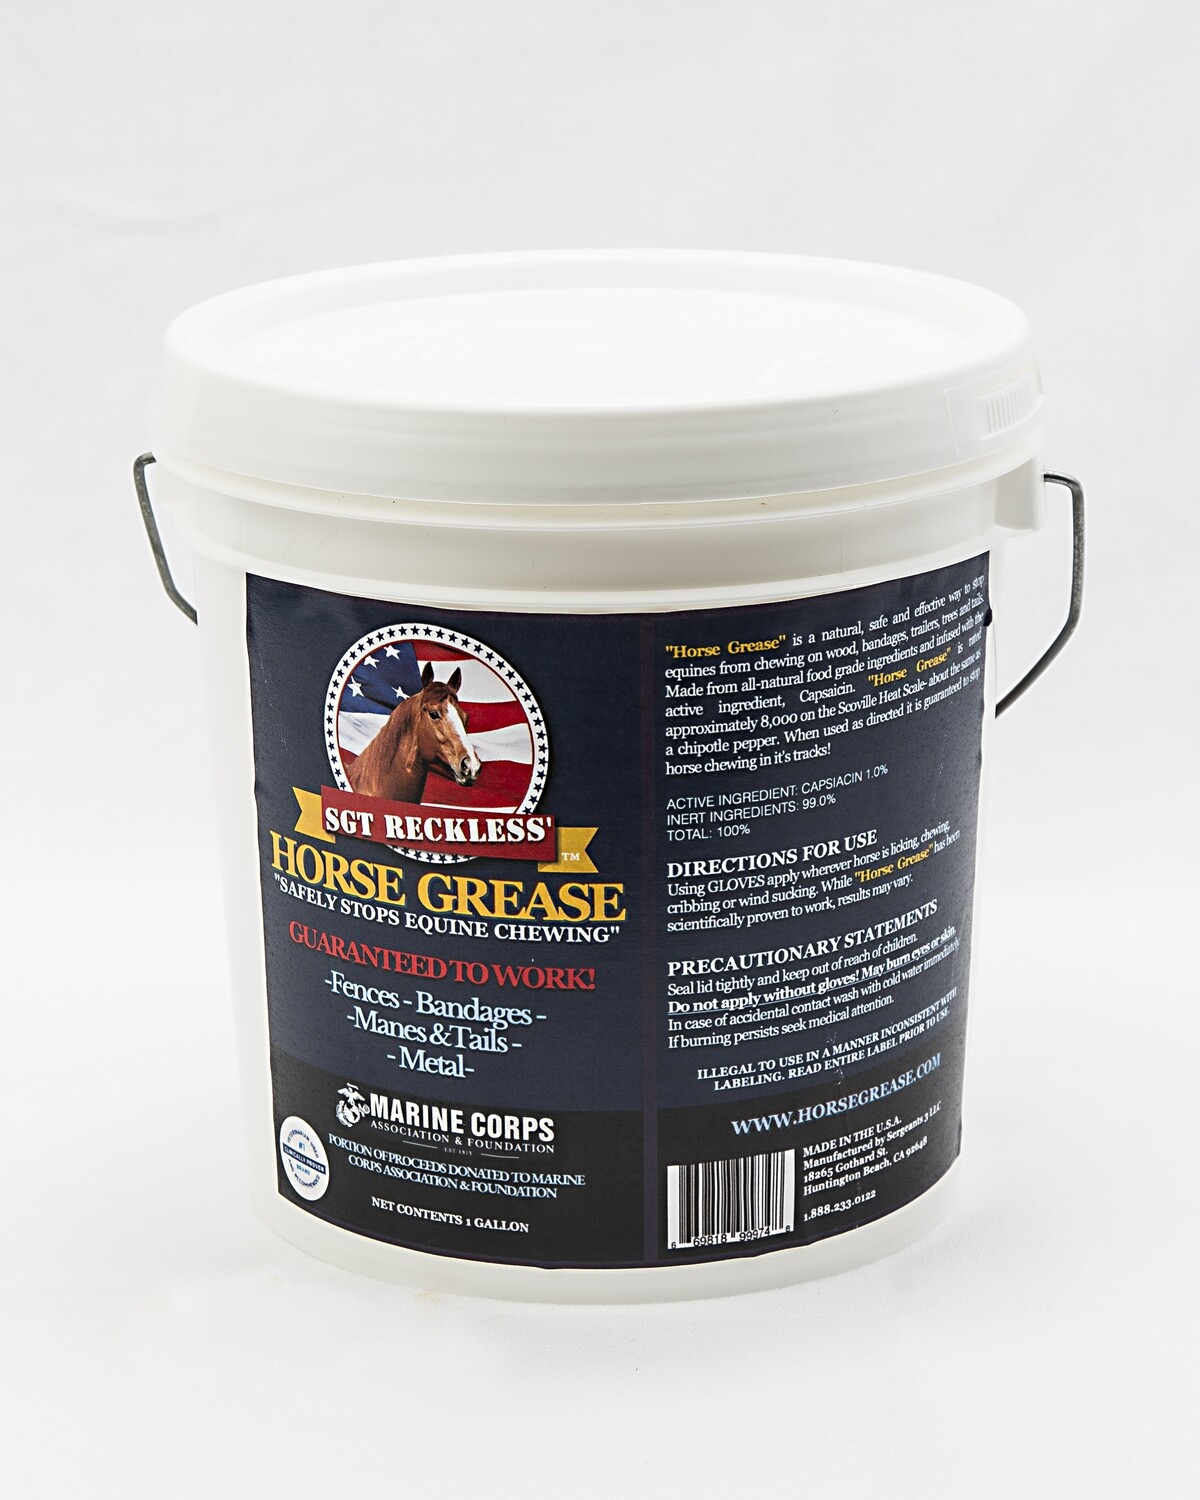 Sgt Reckless Horse Grease, 1 Gallon Pail